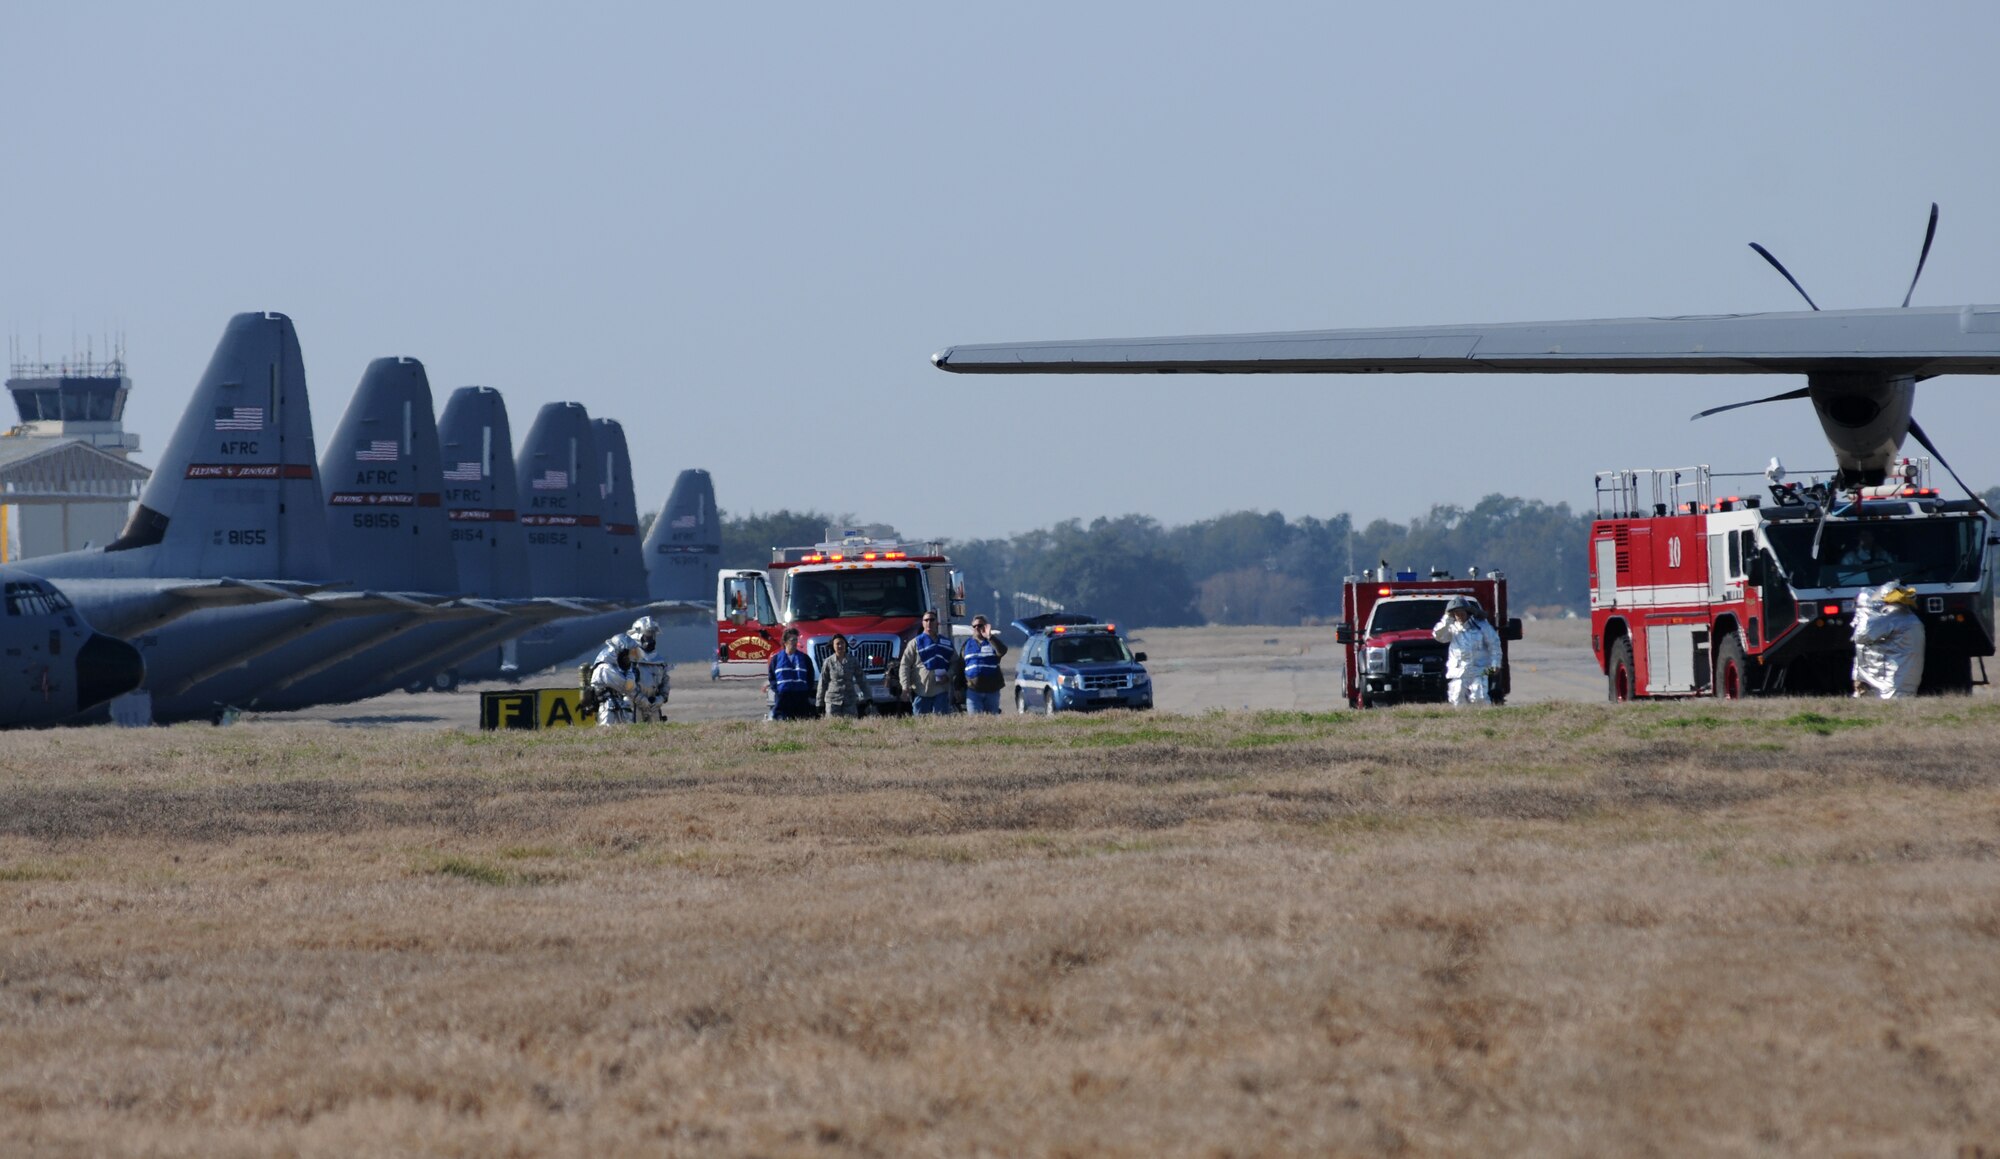 Wing inspection team members assess the area as Keesler firefighters respond during a major accident response exercise Feb. 12, 2015, on the flight line, Keesler Air Force Base, Miss.  The MARE simulated a C-130J Hercules aircraft crash on base. Exercises are held periodically to prepare for real world emergencies.  (U.S. Air Force photo by Kemberly Groue)